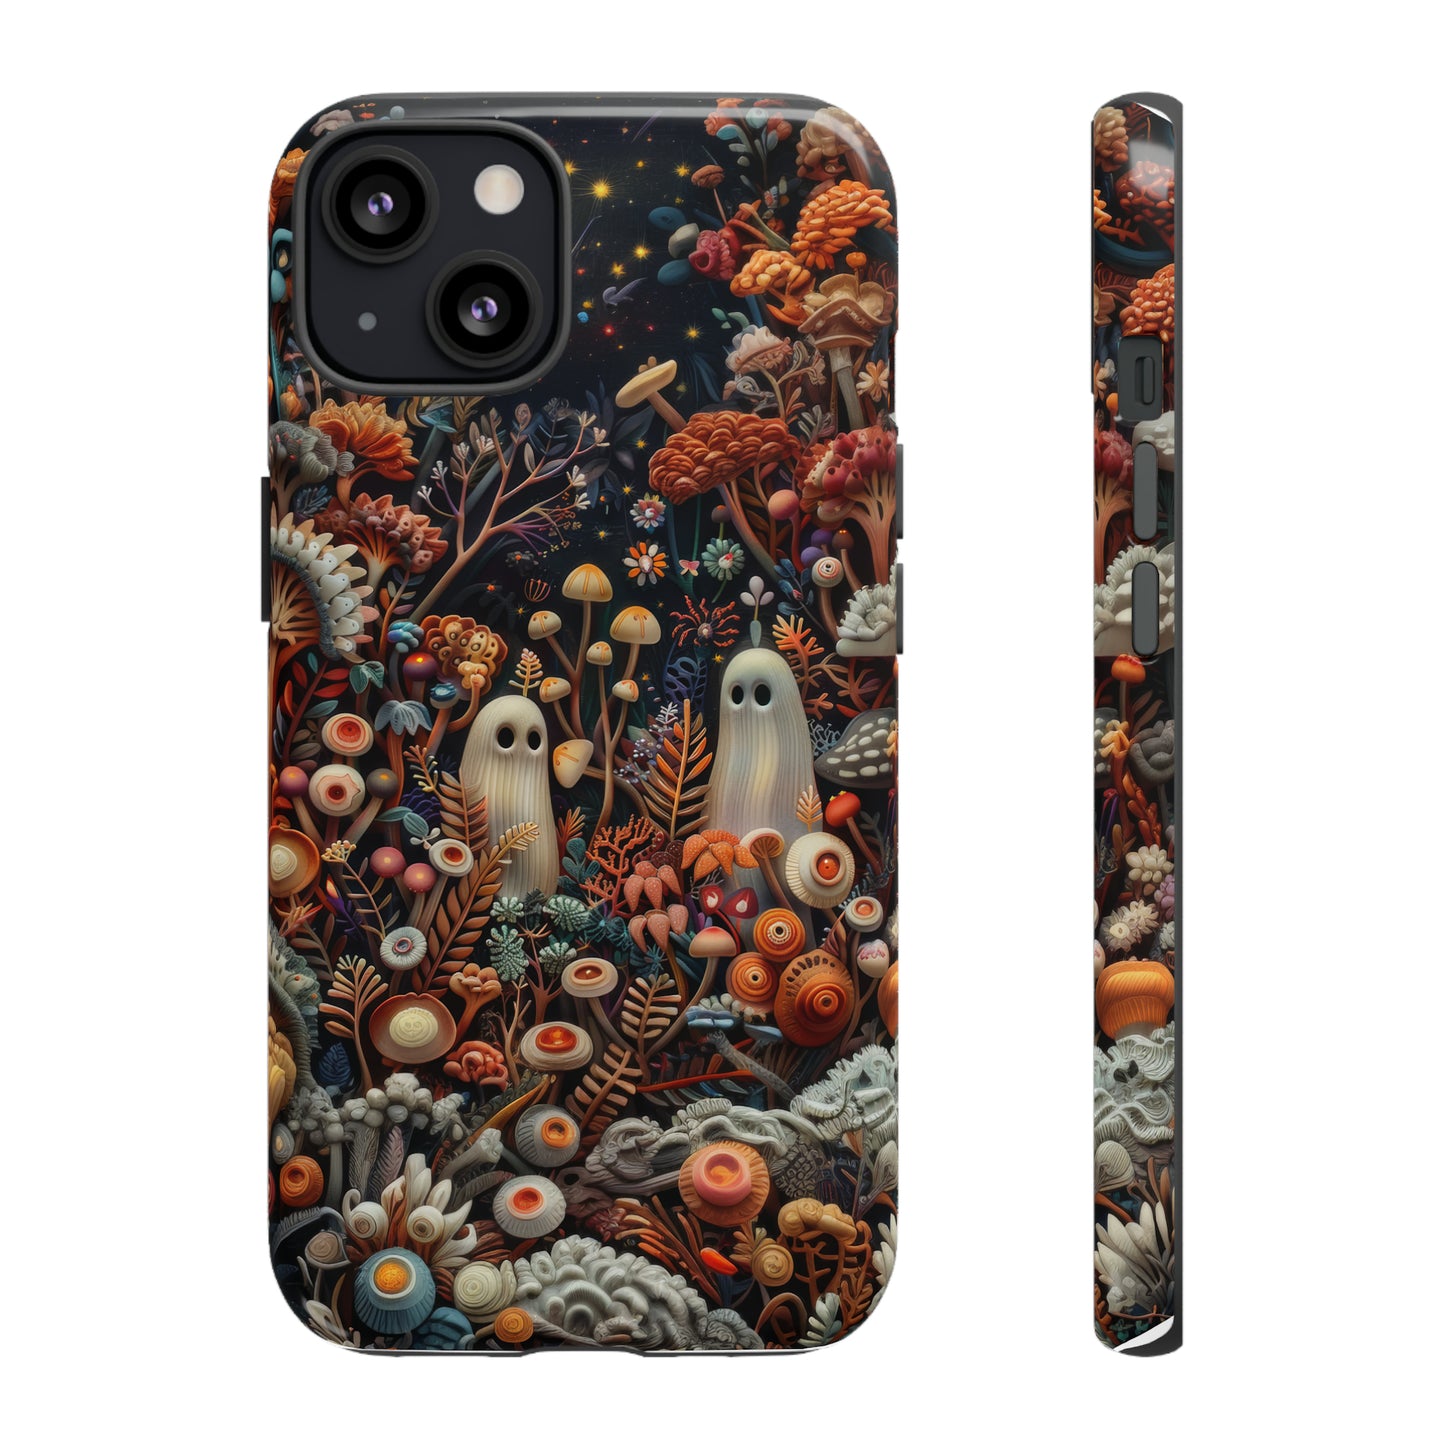 Cosmic Fantasy iPhone Case, Space-Themed Mushroom Design, Protective Cover with Galactic Charm, Tough Phone Cases